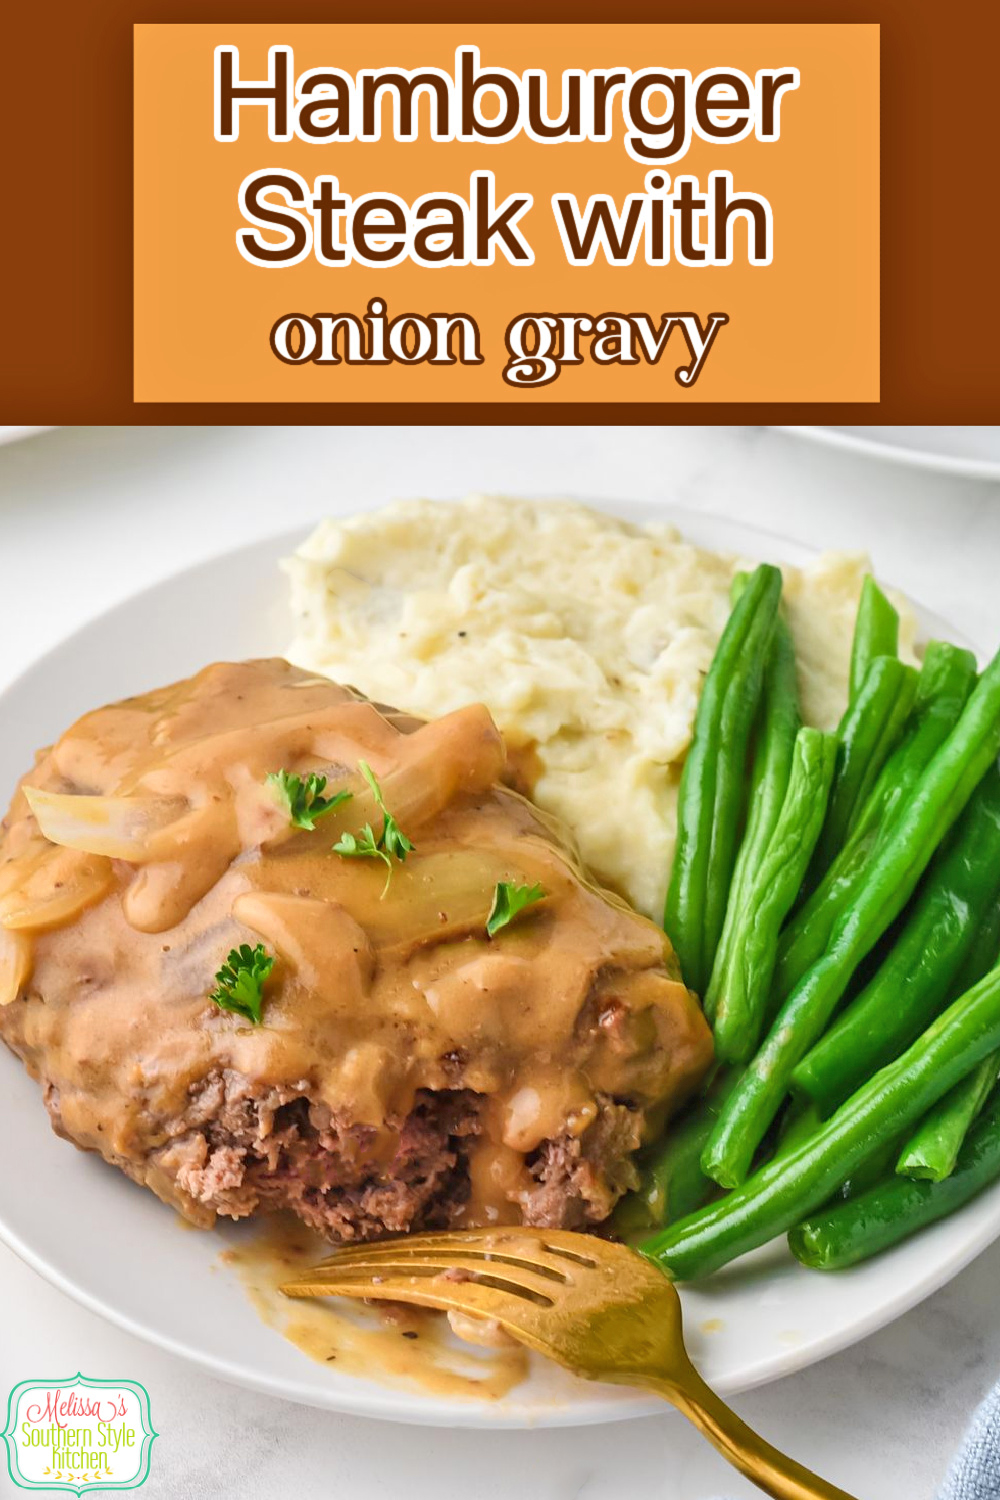 This easy Hamburger Steak recipe is smothered with a rich homemade onion gravy. It's a Southern style feast with a side of mashed potatoes #hamburgersteak #besthamburgerrecipes #southernhamburgersteak #oniongravy #salisburysteak #easyhamburgersteaks #easygroundbeefrecipes